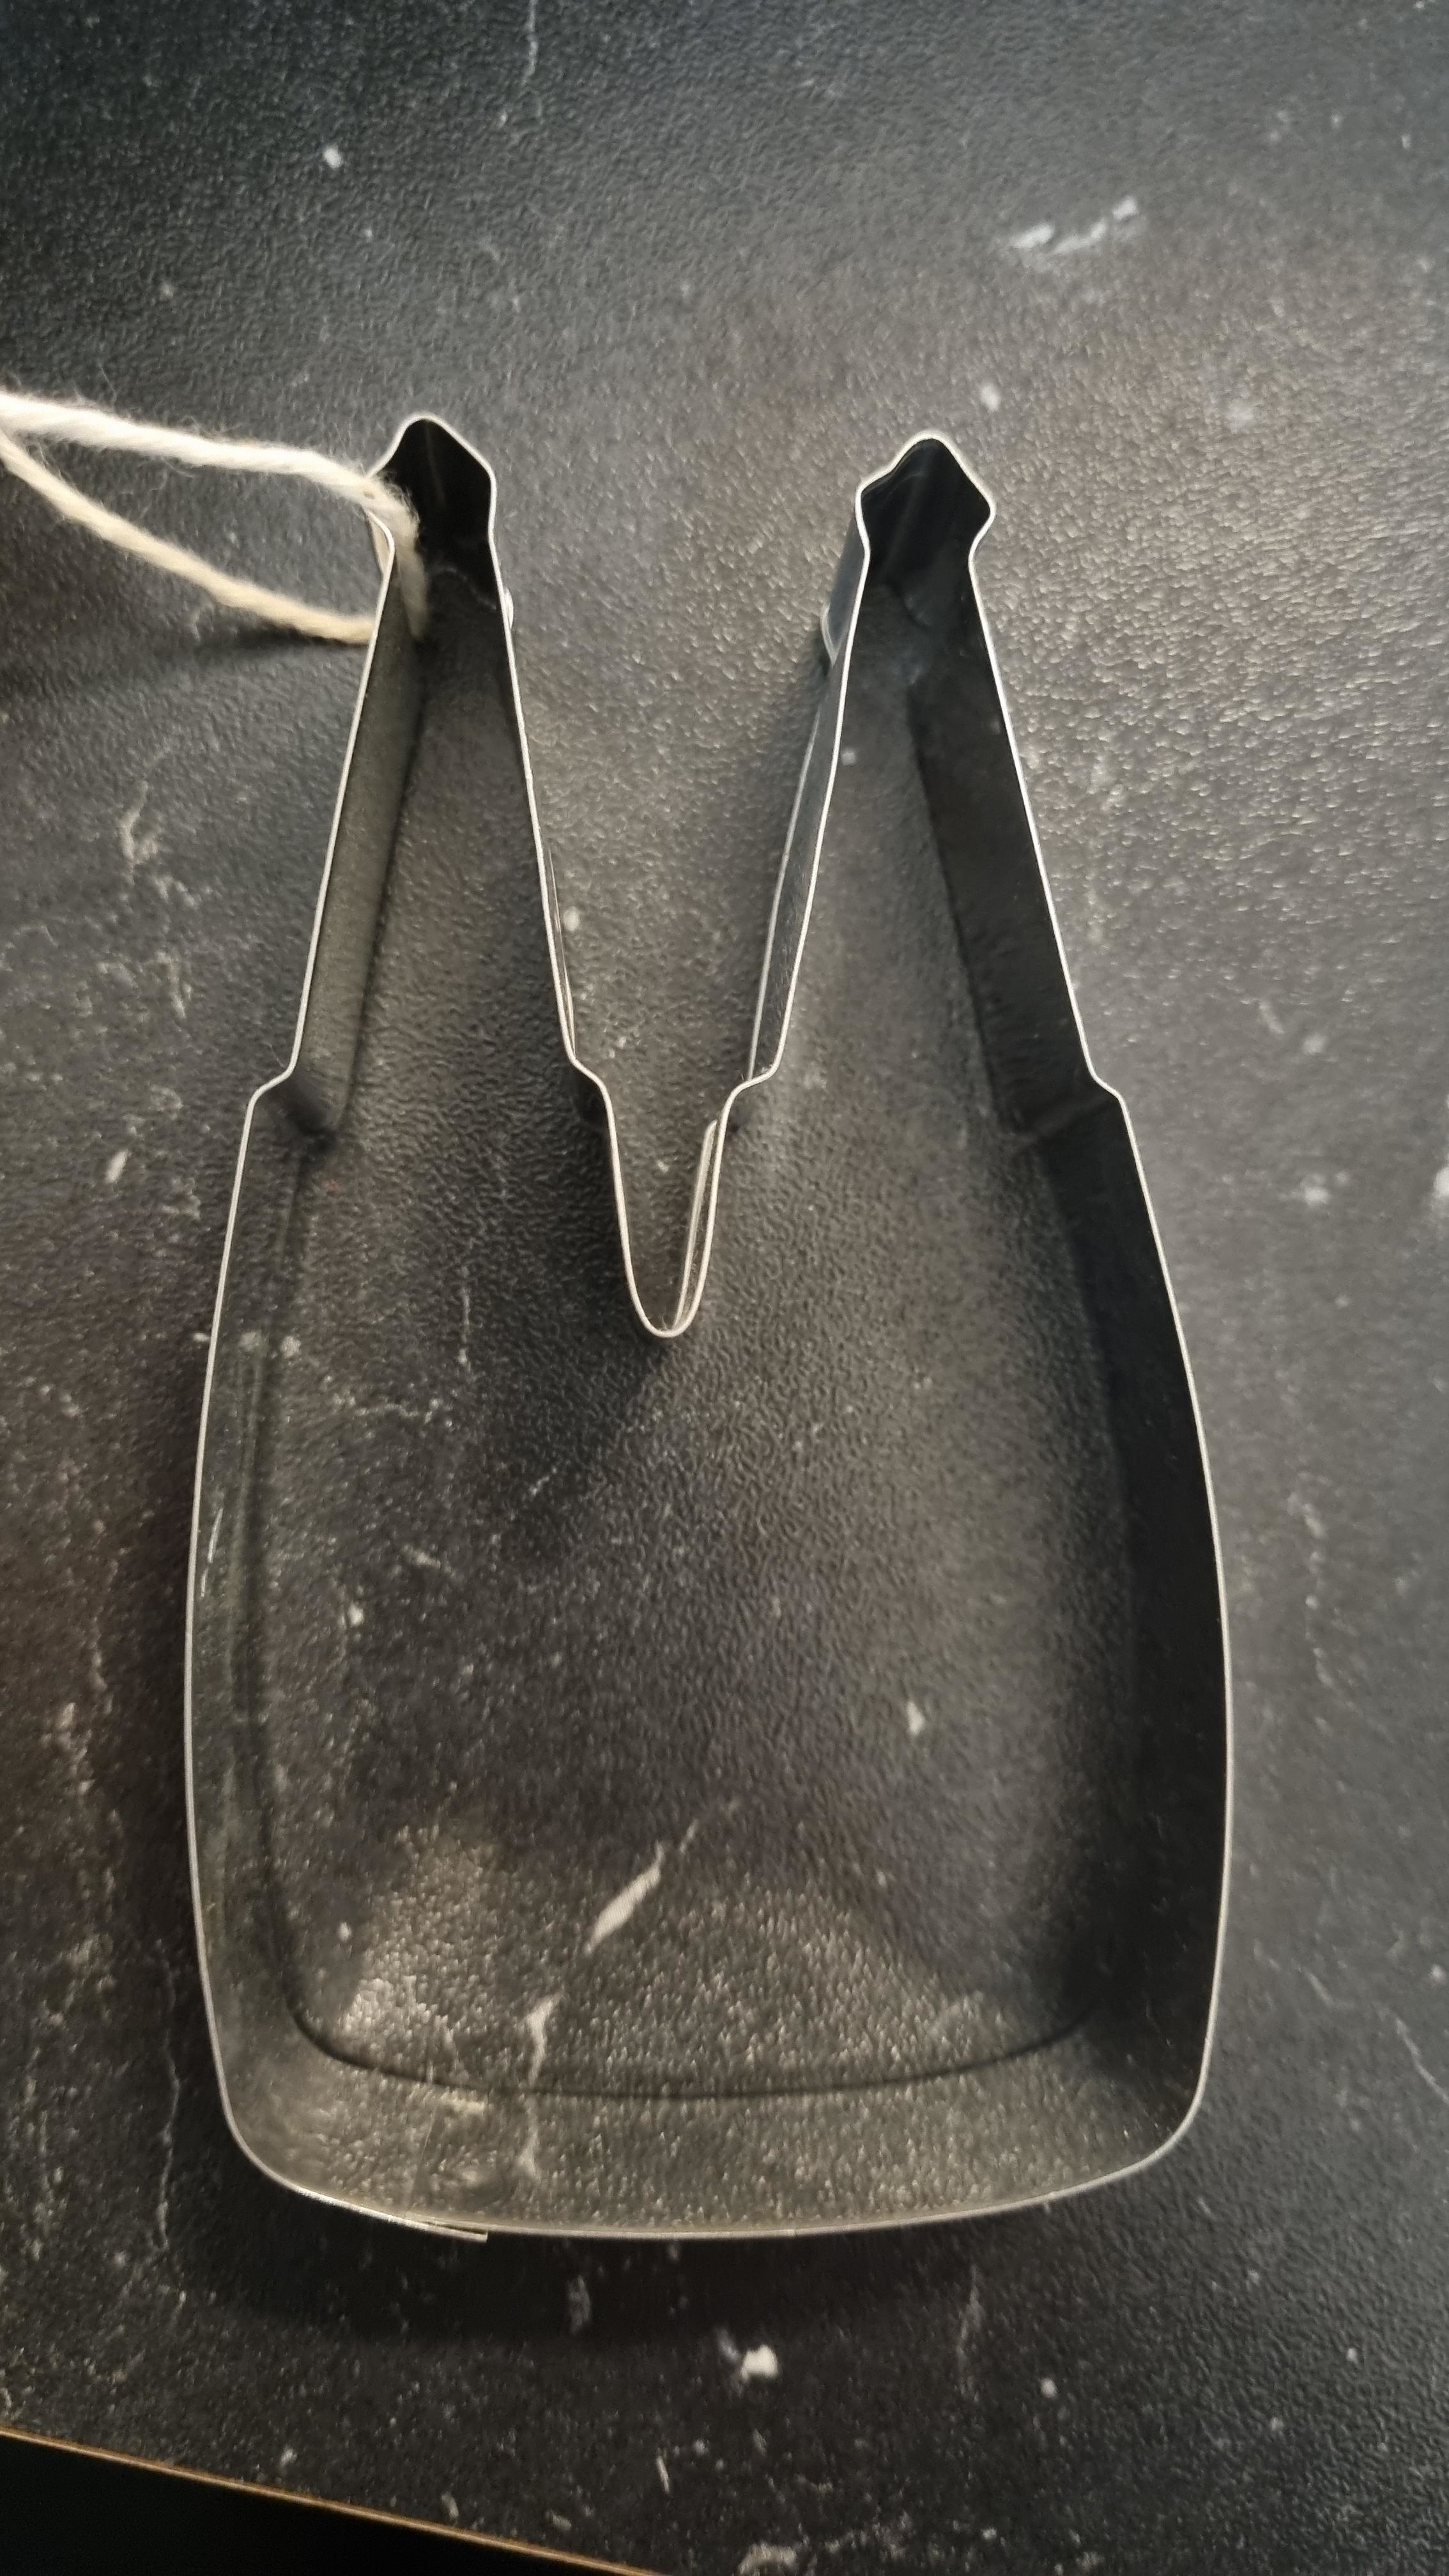 A cookie cutter that&#x27;s difficult to identify but could be two beer bottles next to each other